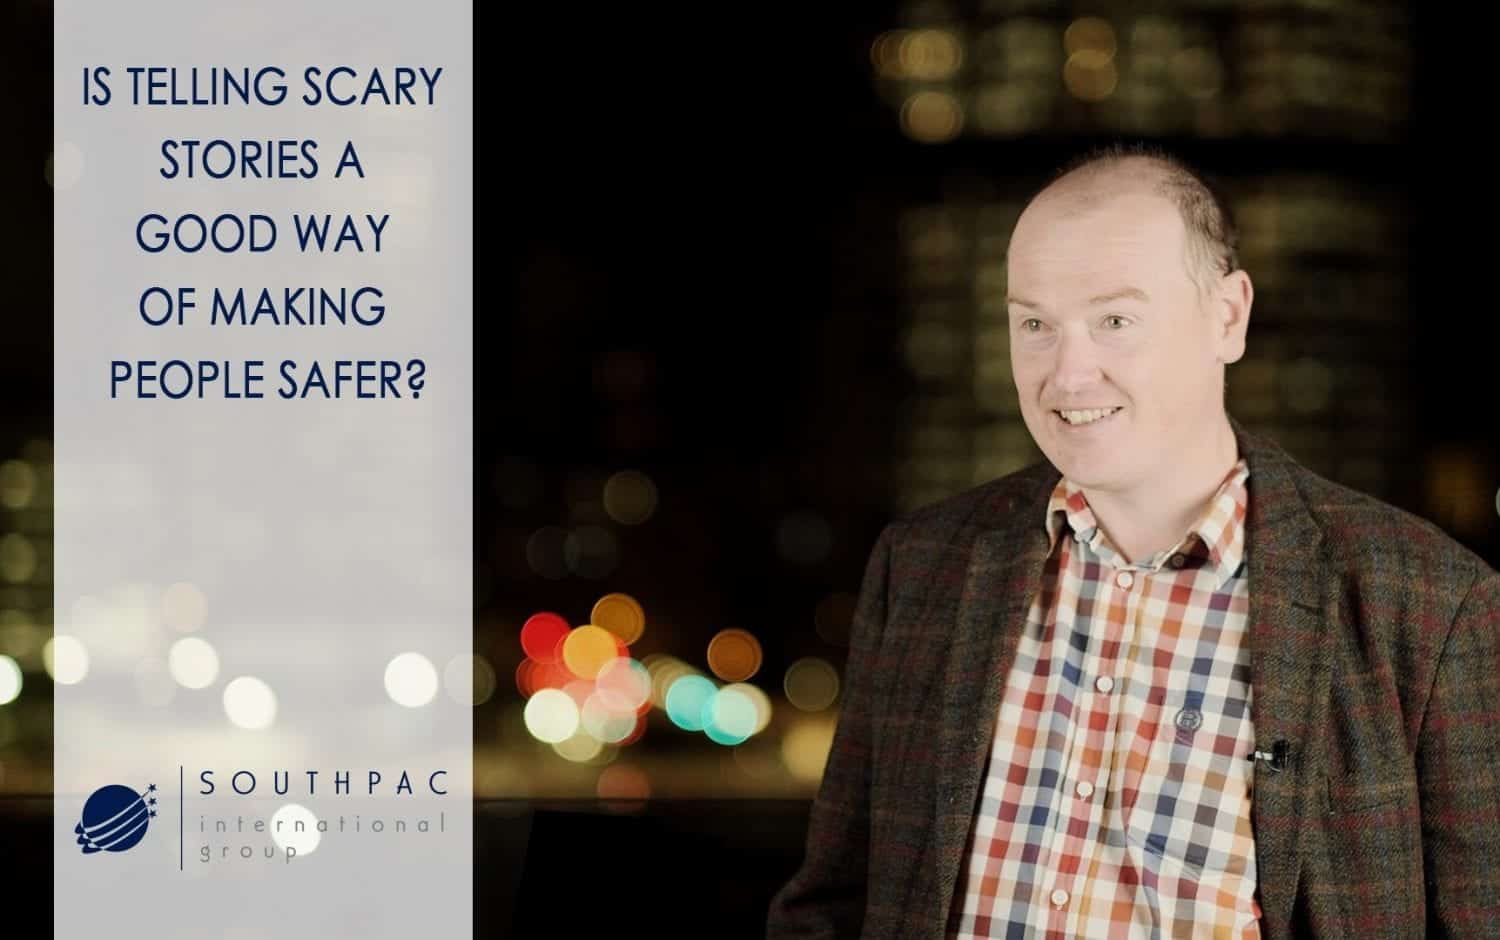 Drew Rae answers "Is telling scary stories a good way of making people safer"